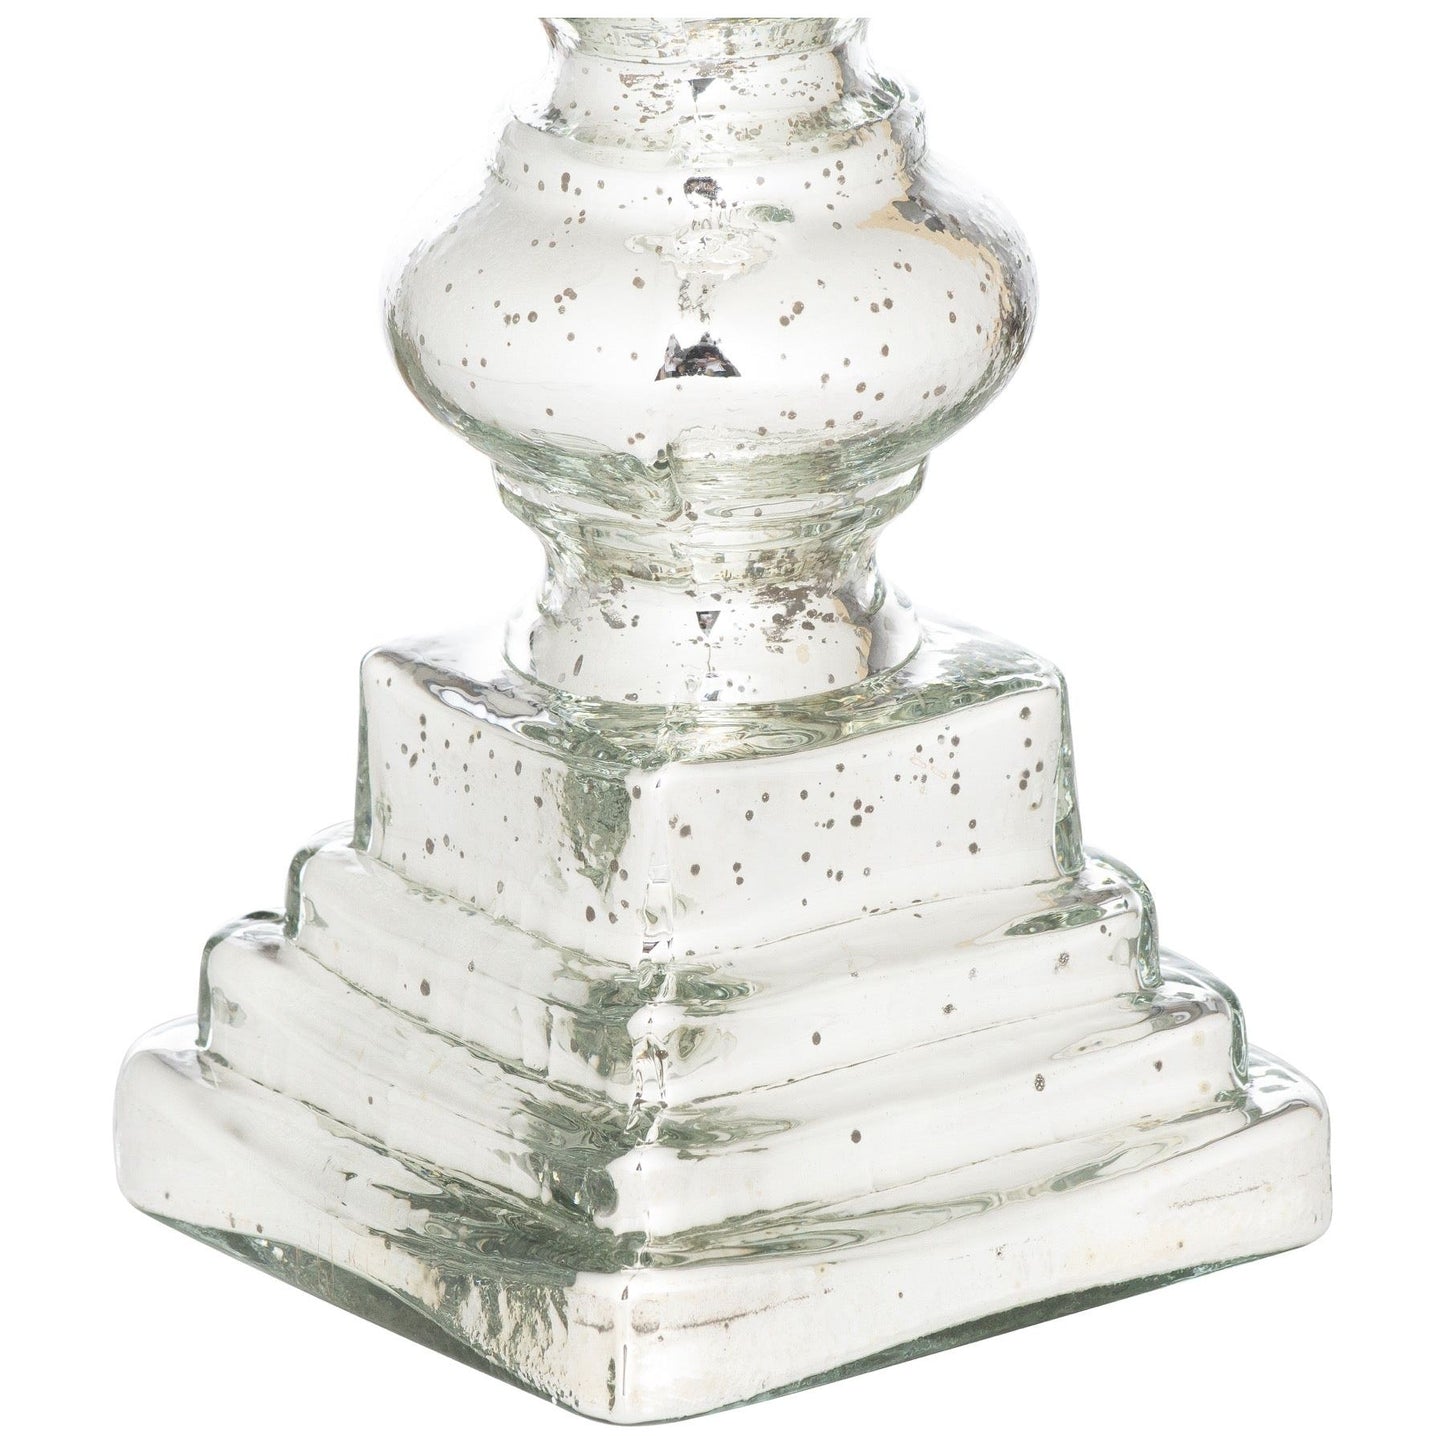 Mercury Effect Glass Top Tall Candle Pillar Holder - Ashton and Finch